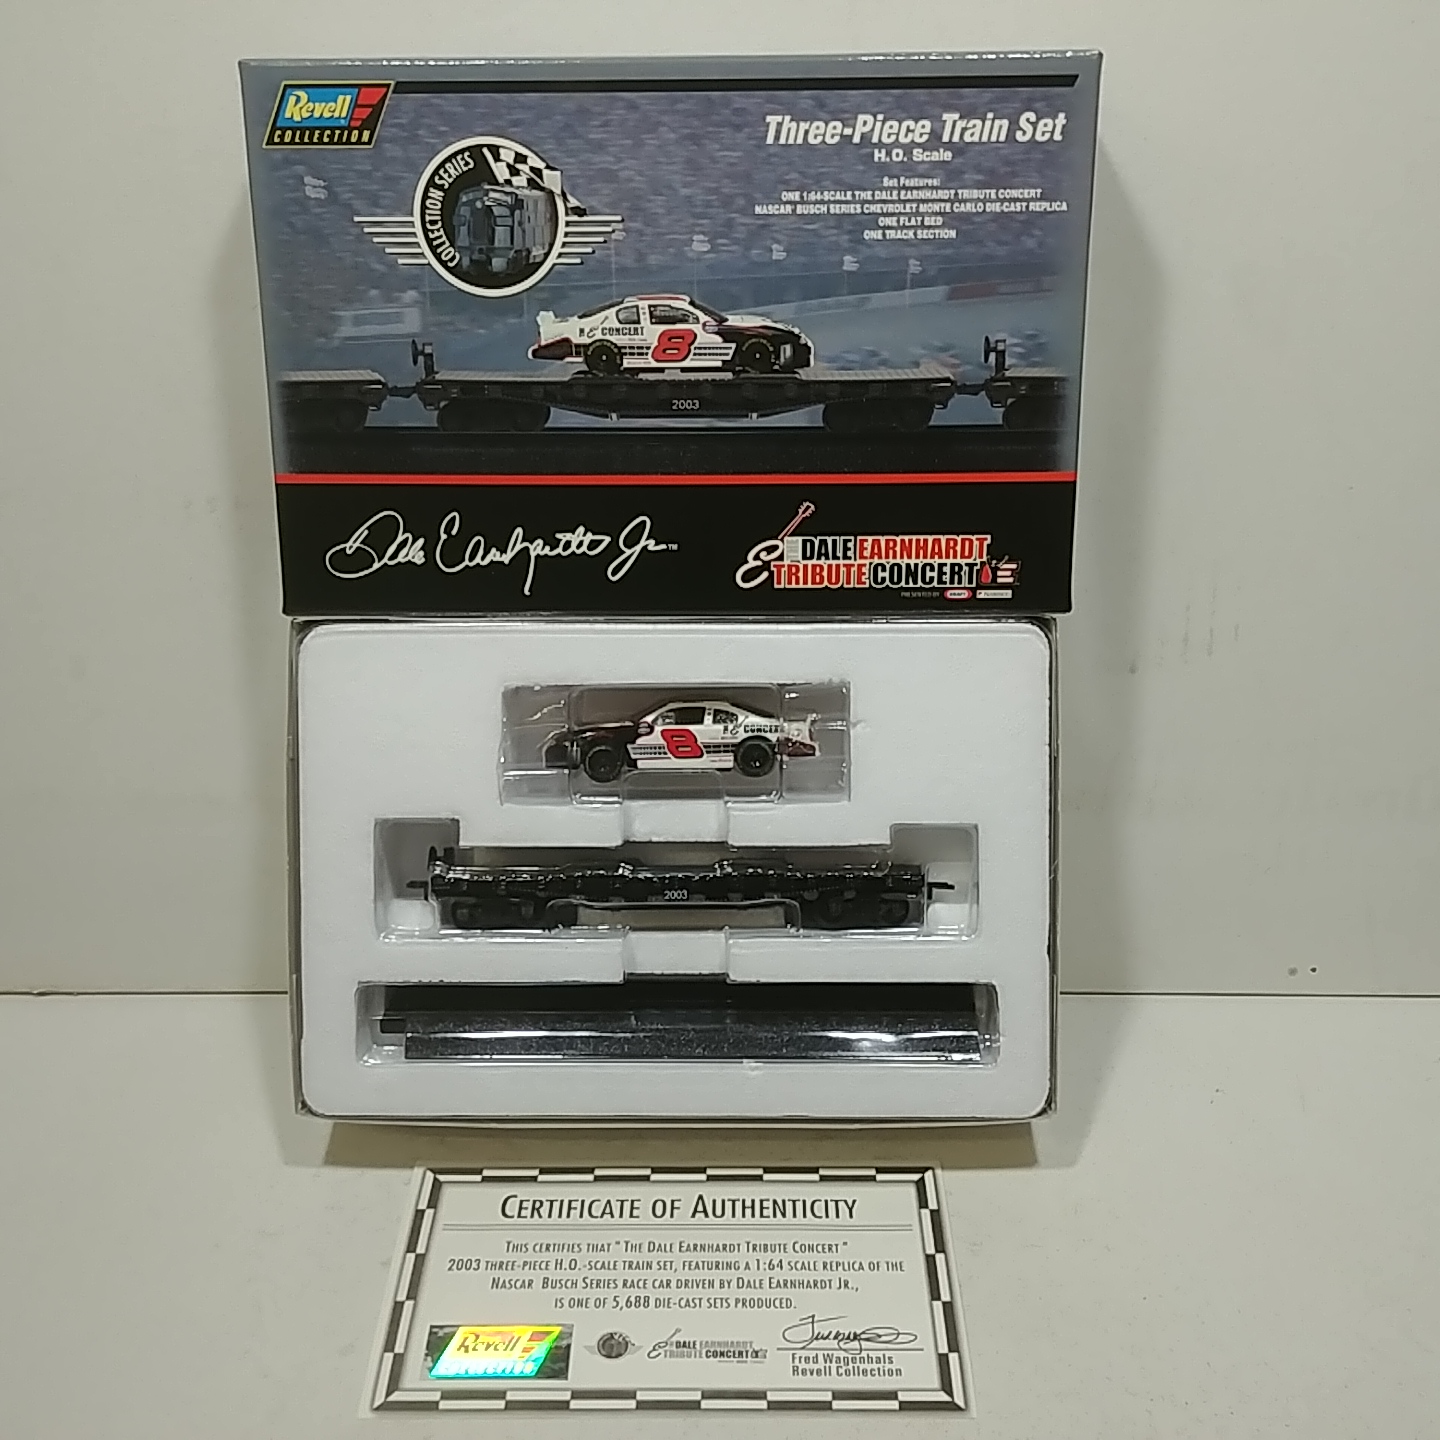 2003 Dale Earnhardt Jr 1/64th Tribute Concert flat car with Monte Carlo add on